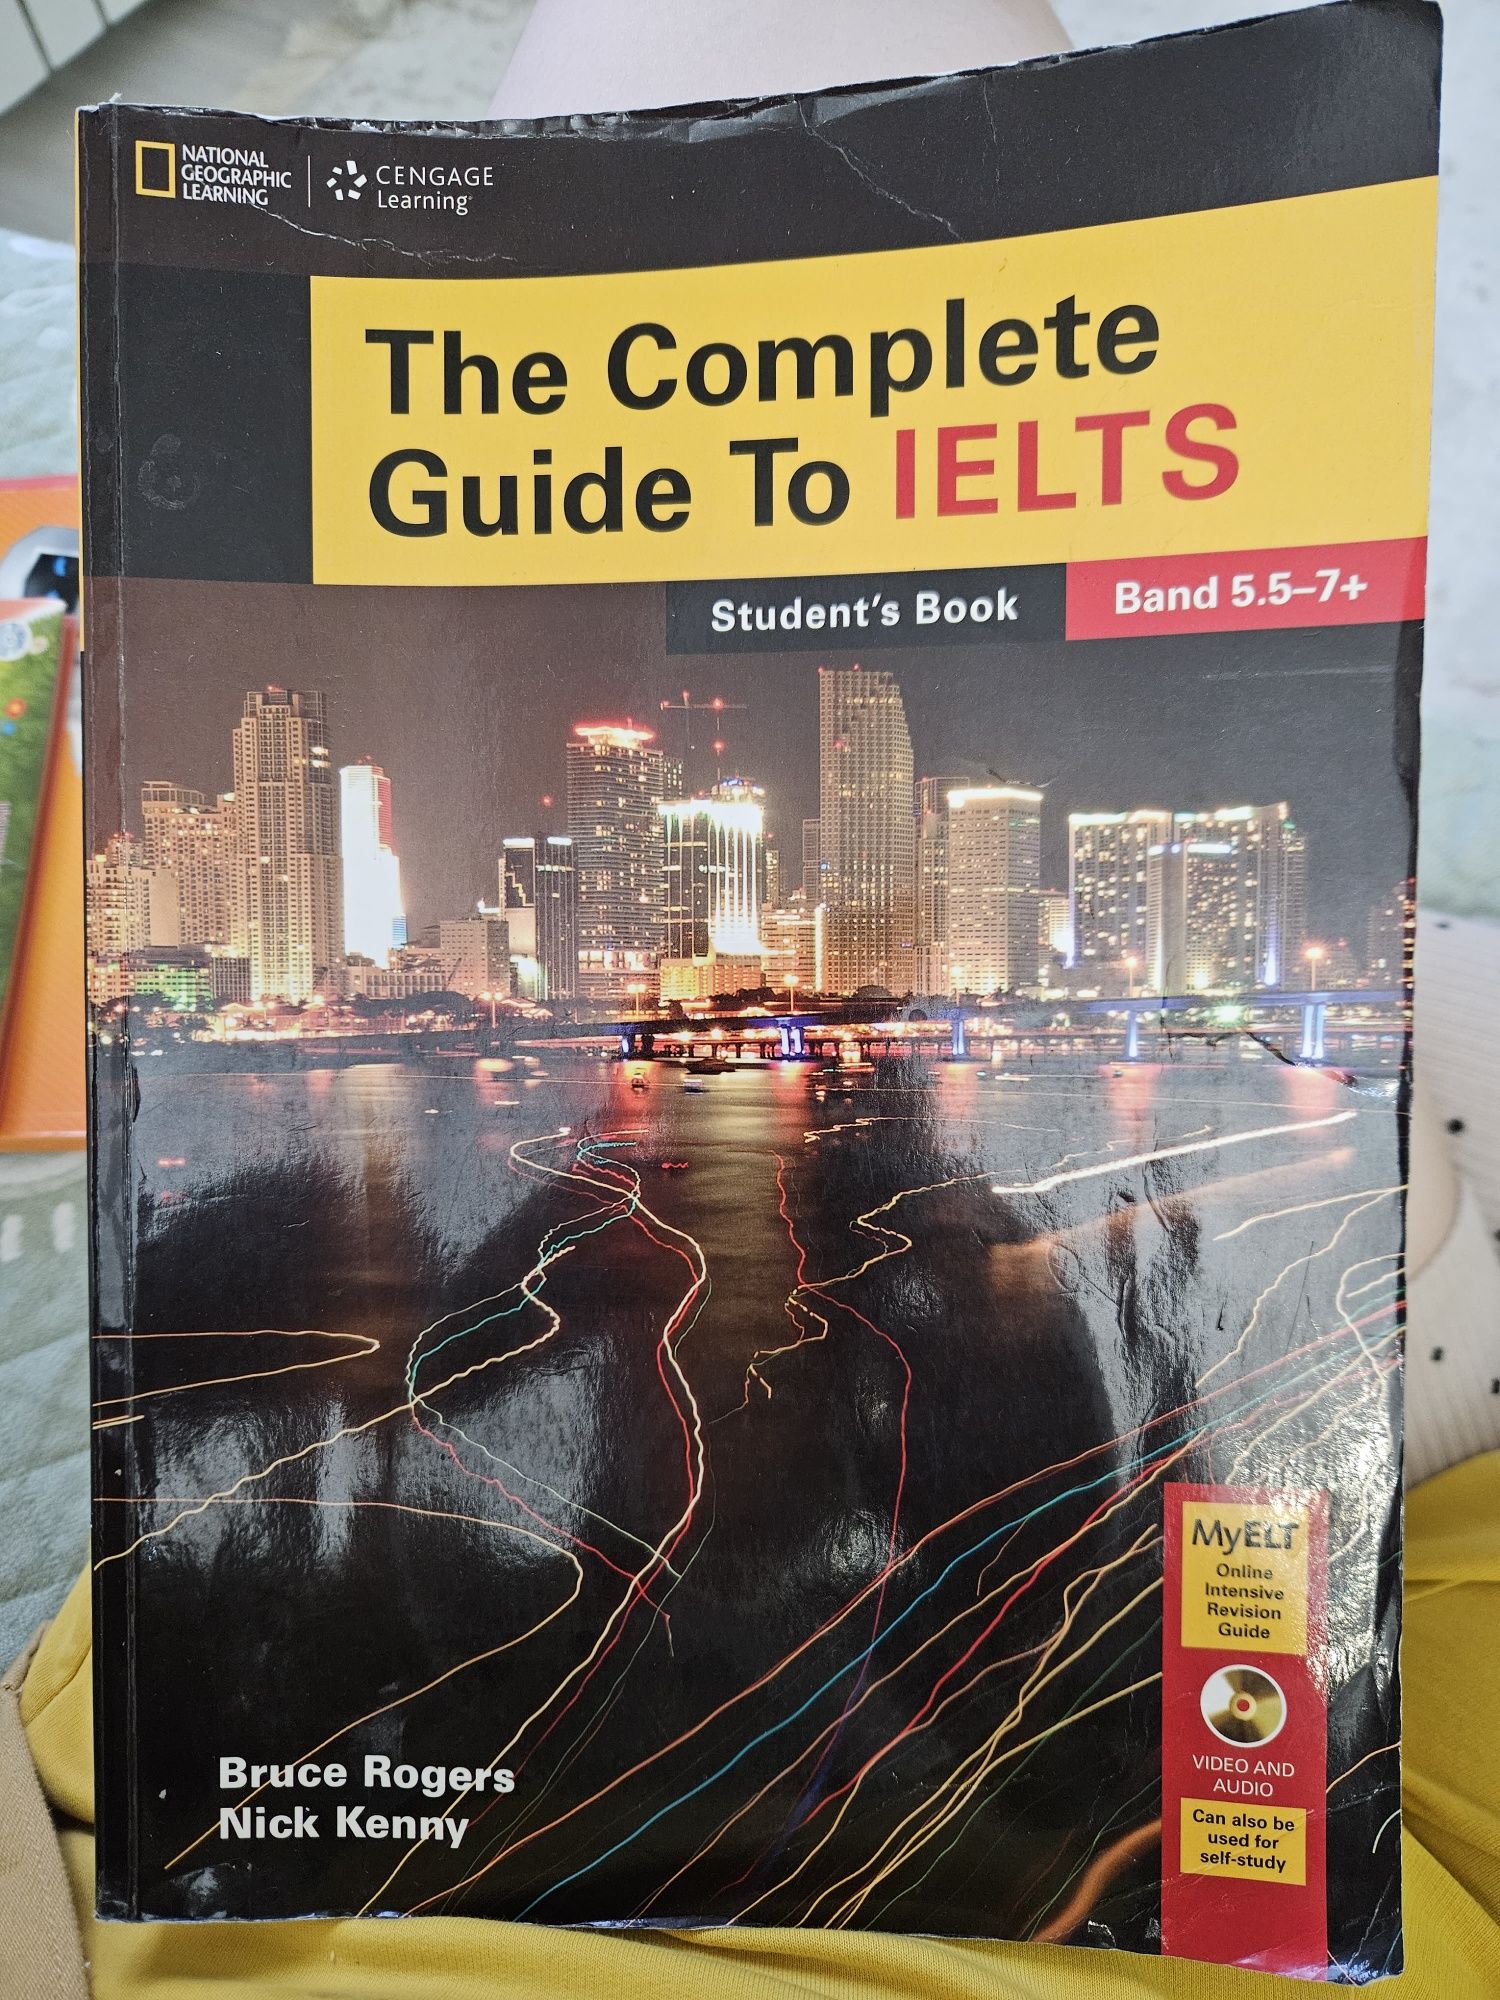 The Complete Guide To IELTS(National Geographic Learning)Band 5,5-7+